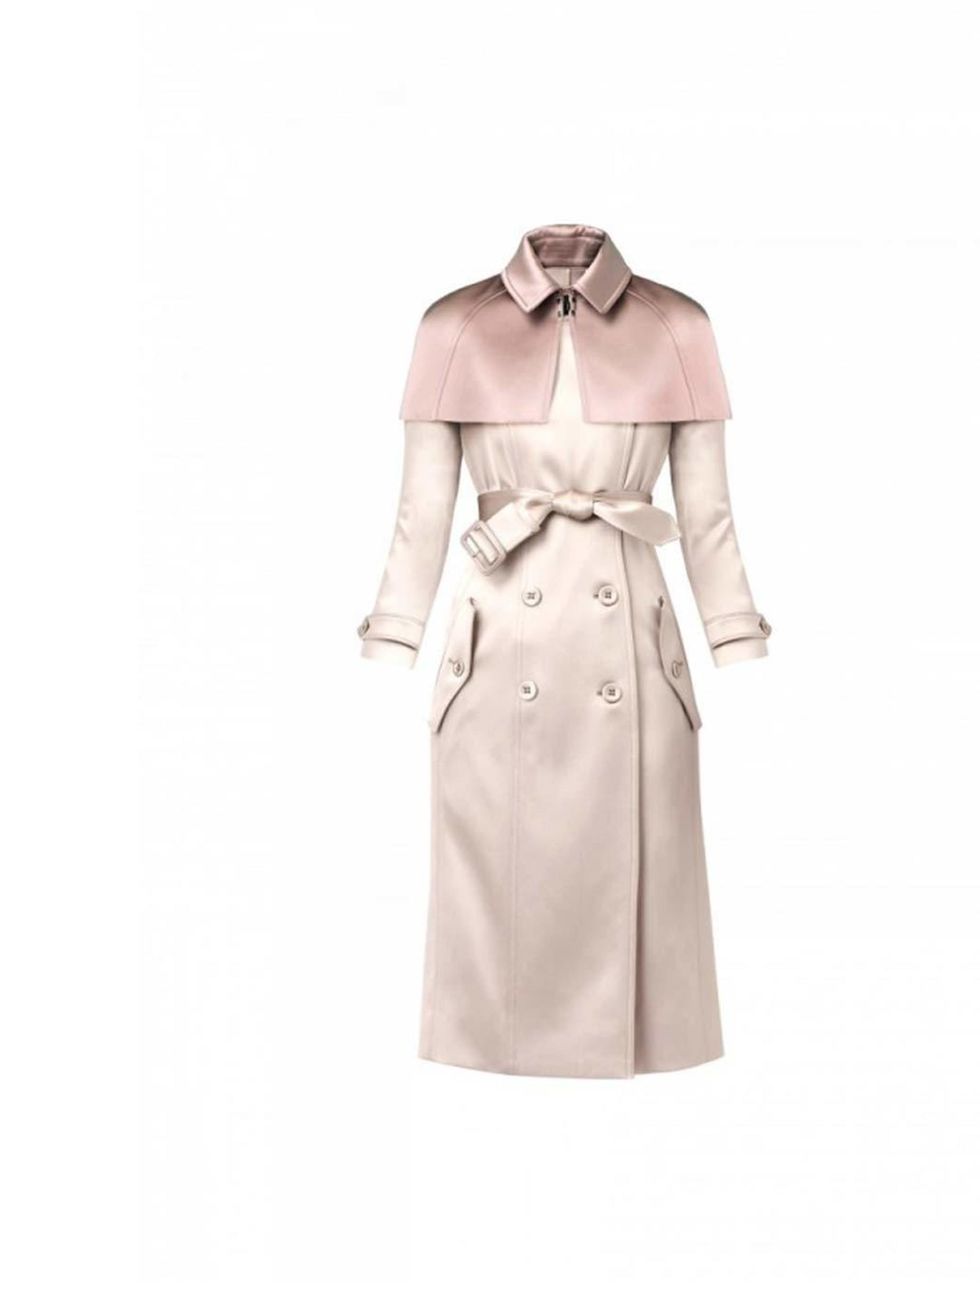 <p>If Kate Middleton were a coat, she'd probably be this coat - British and beautiful.</p><p><a href="http://uk.burberry.com/store/?WT.srch=1&amp;kid=24840b65-2b8e-2f09-7acb-0000149f5c1a">Burberry</a> satin trench coat, £1595</p>